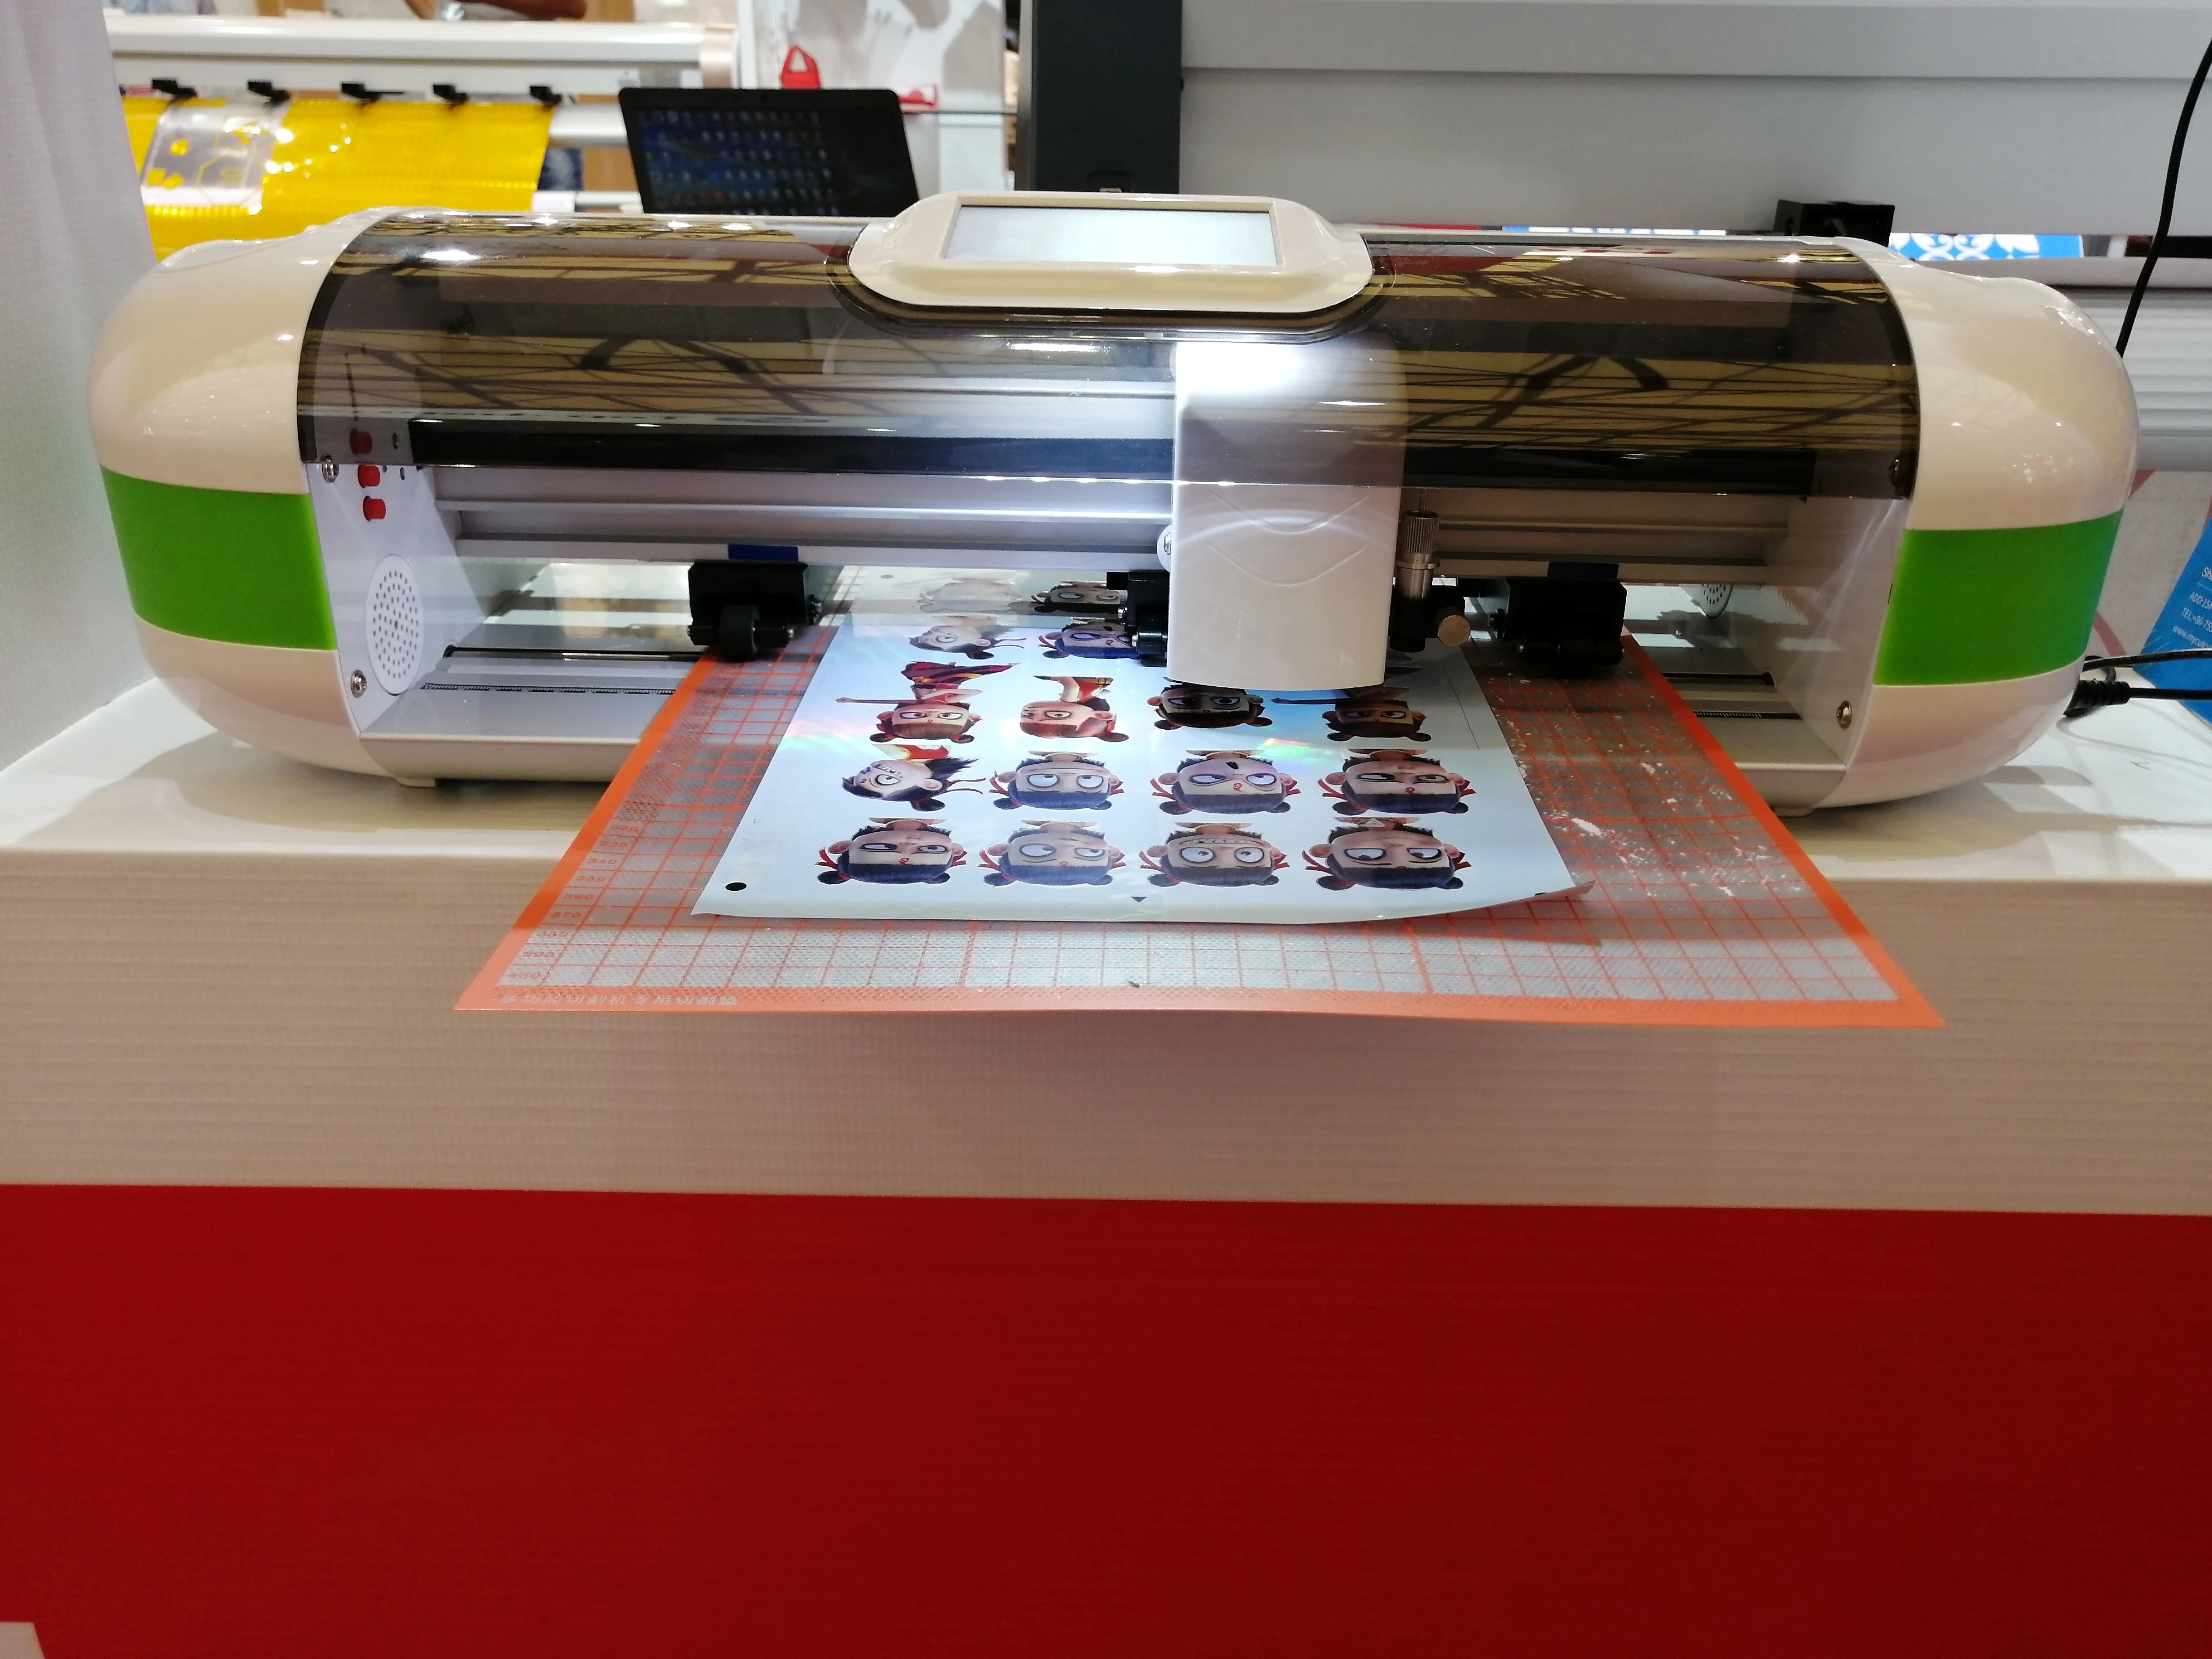 A3/a4 size  430mmCar sticker self-adhesive vinyl printing film cutting plotter with camera contour auto cut funtion